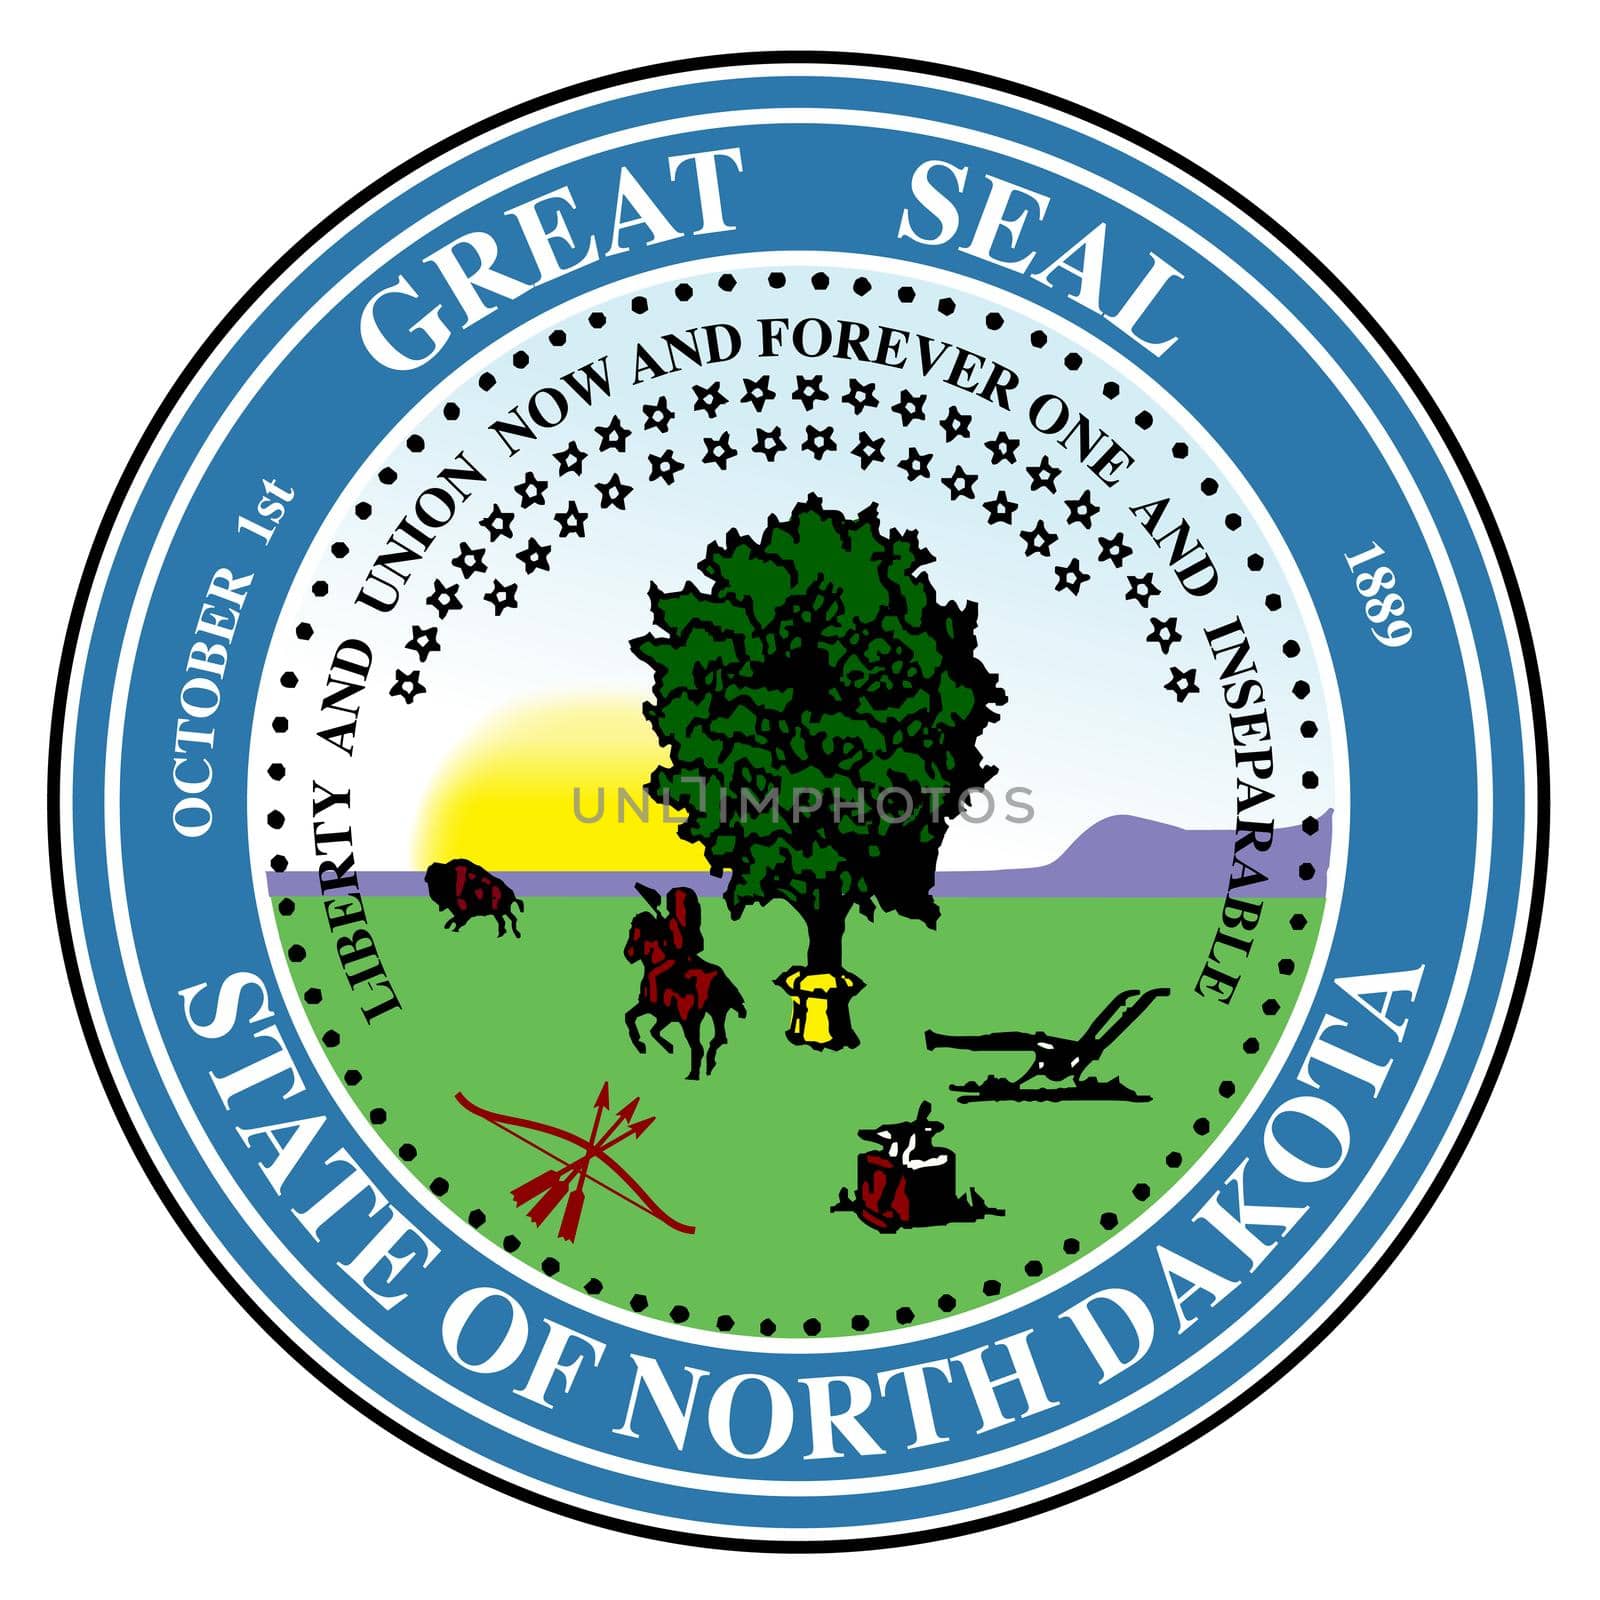 The seal of the state of North Dakota